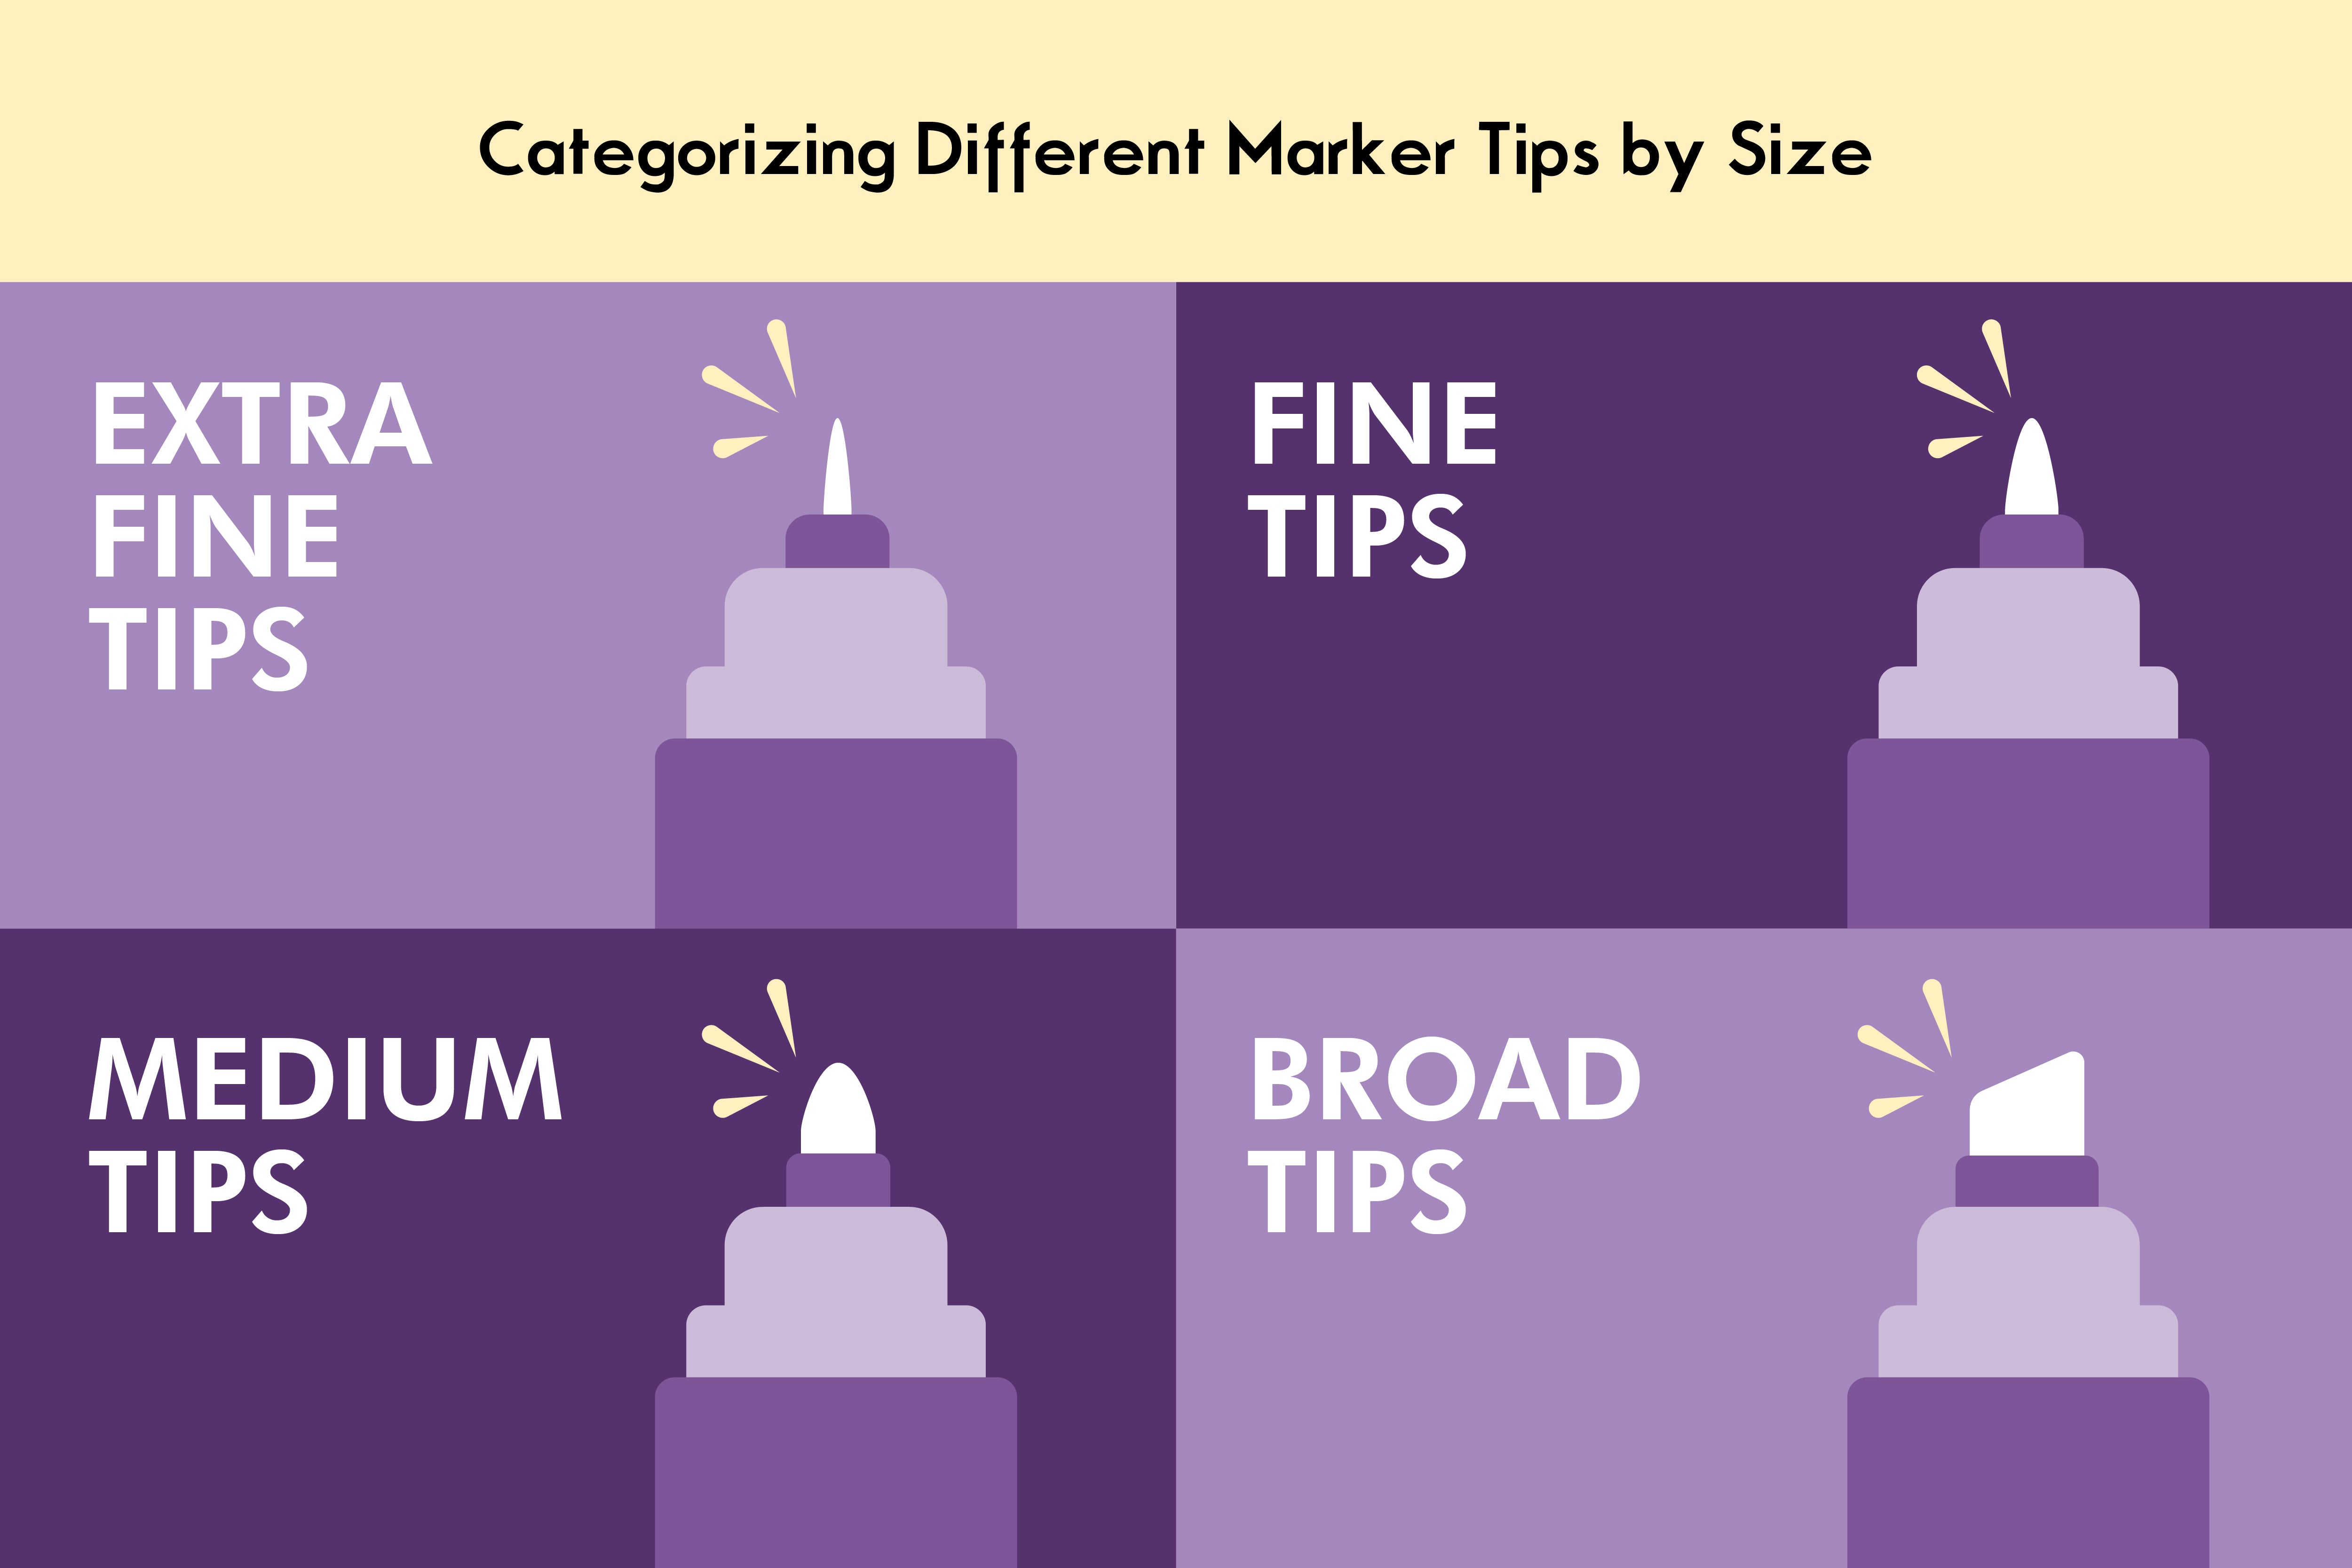 A graphic illustration illustrating the different marker tips according to size